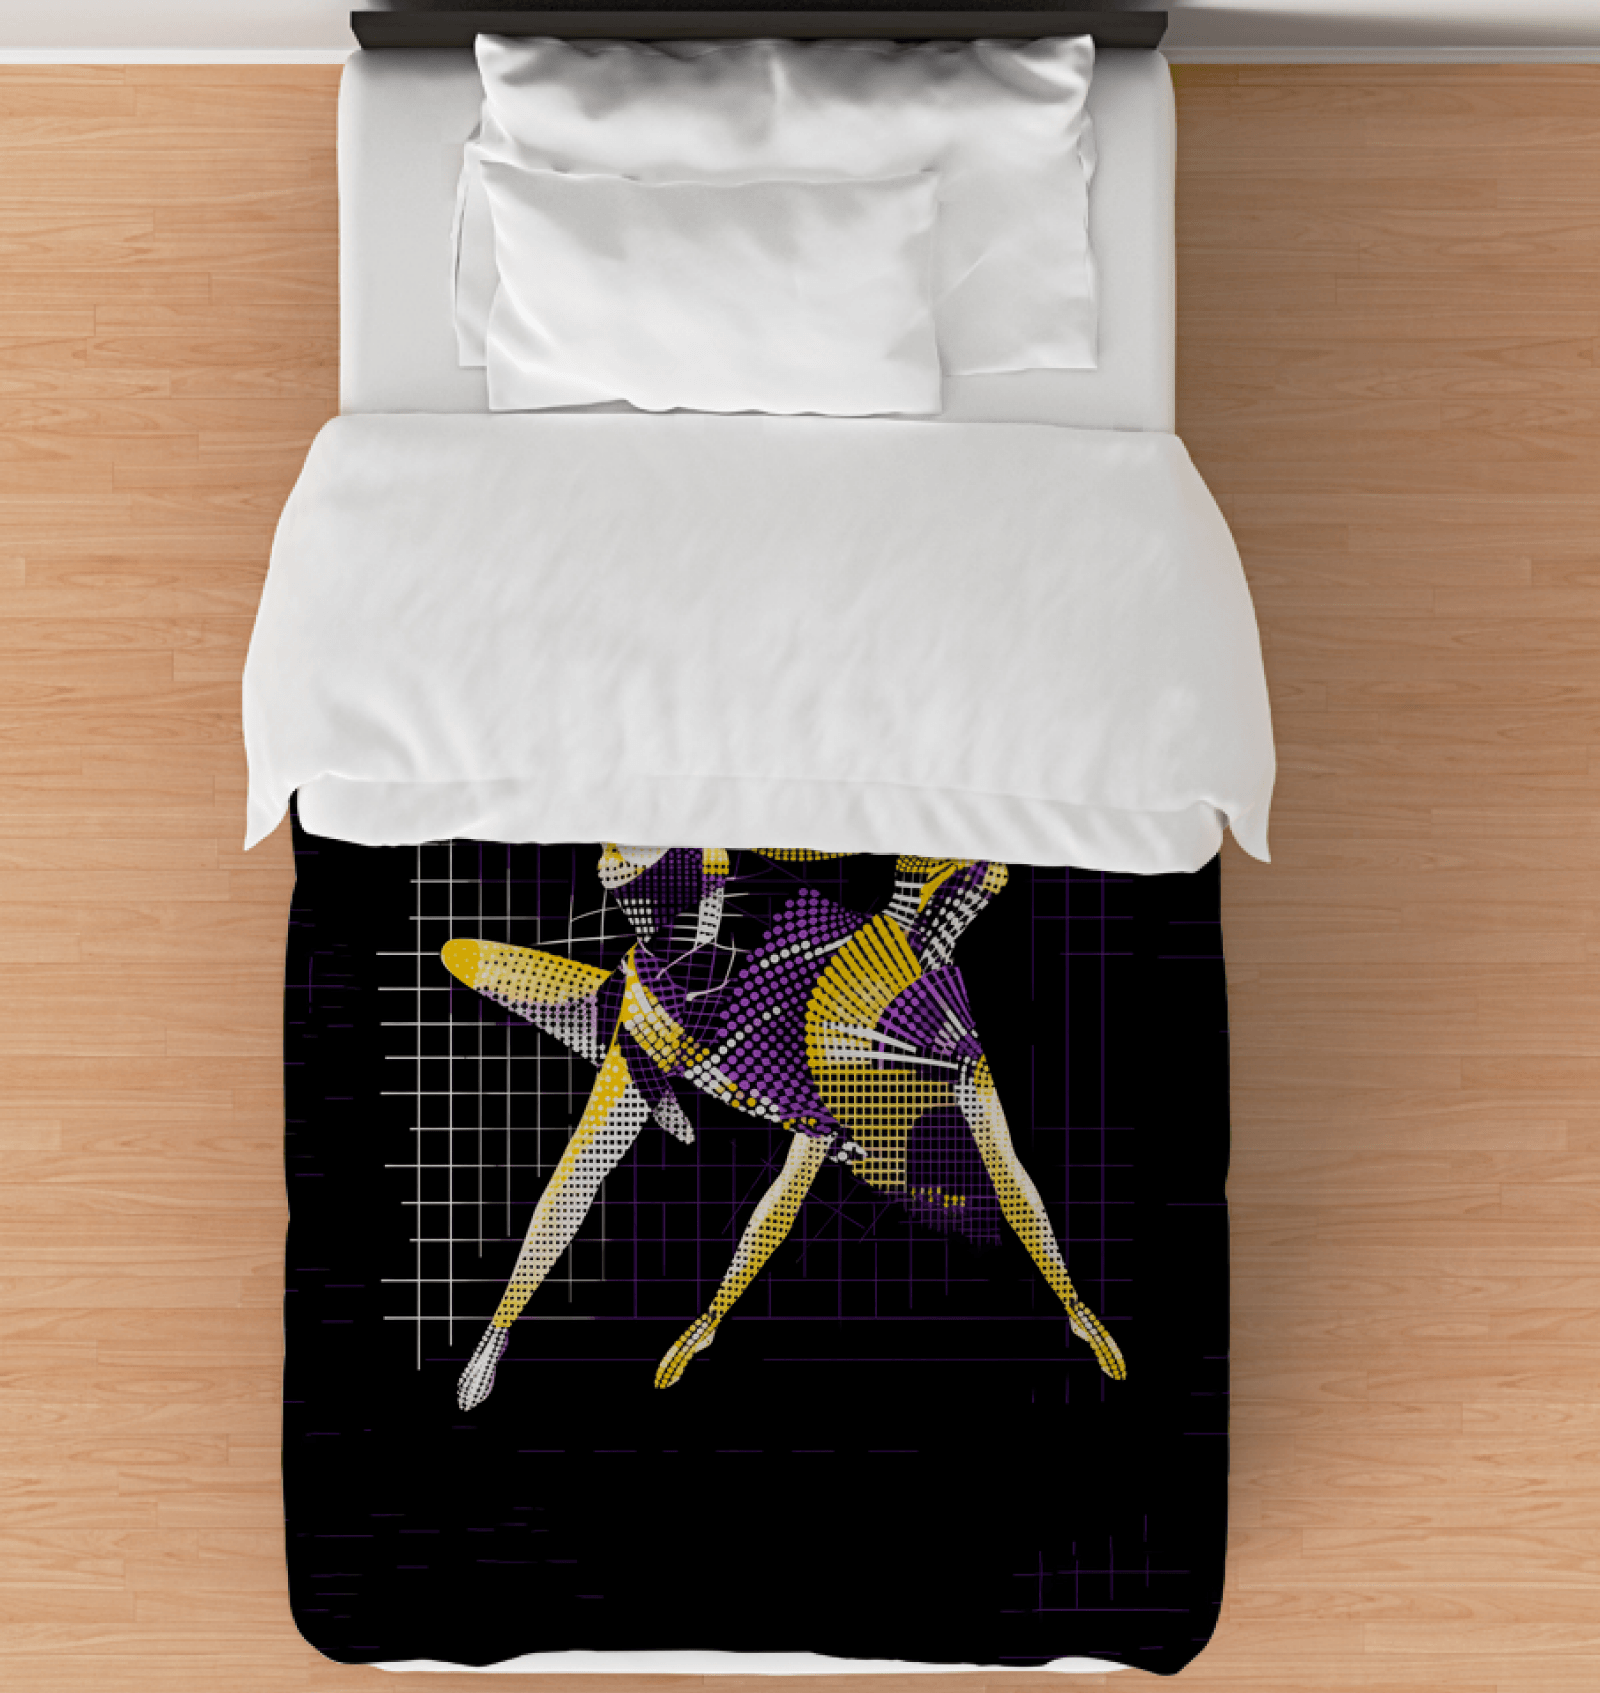 Stylish bedroom with dazzling dance-inspired duvet cover for a unique touch.